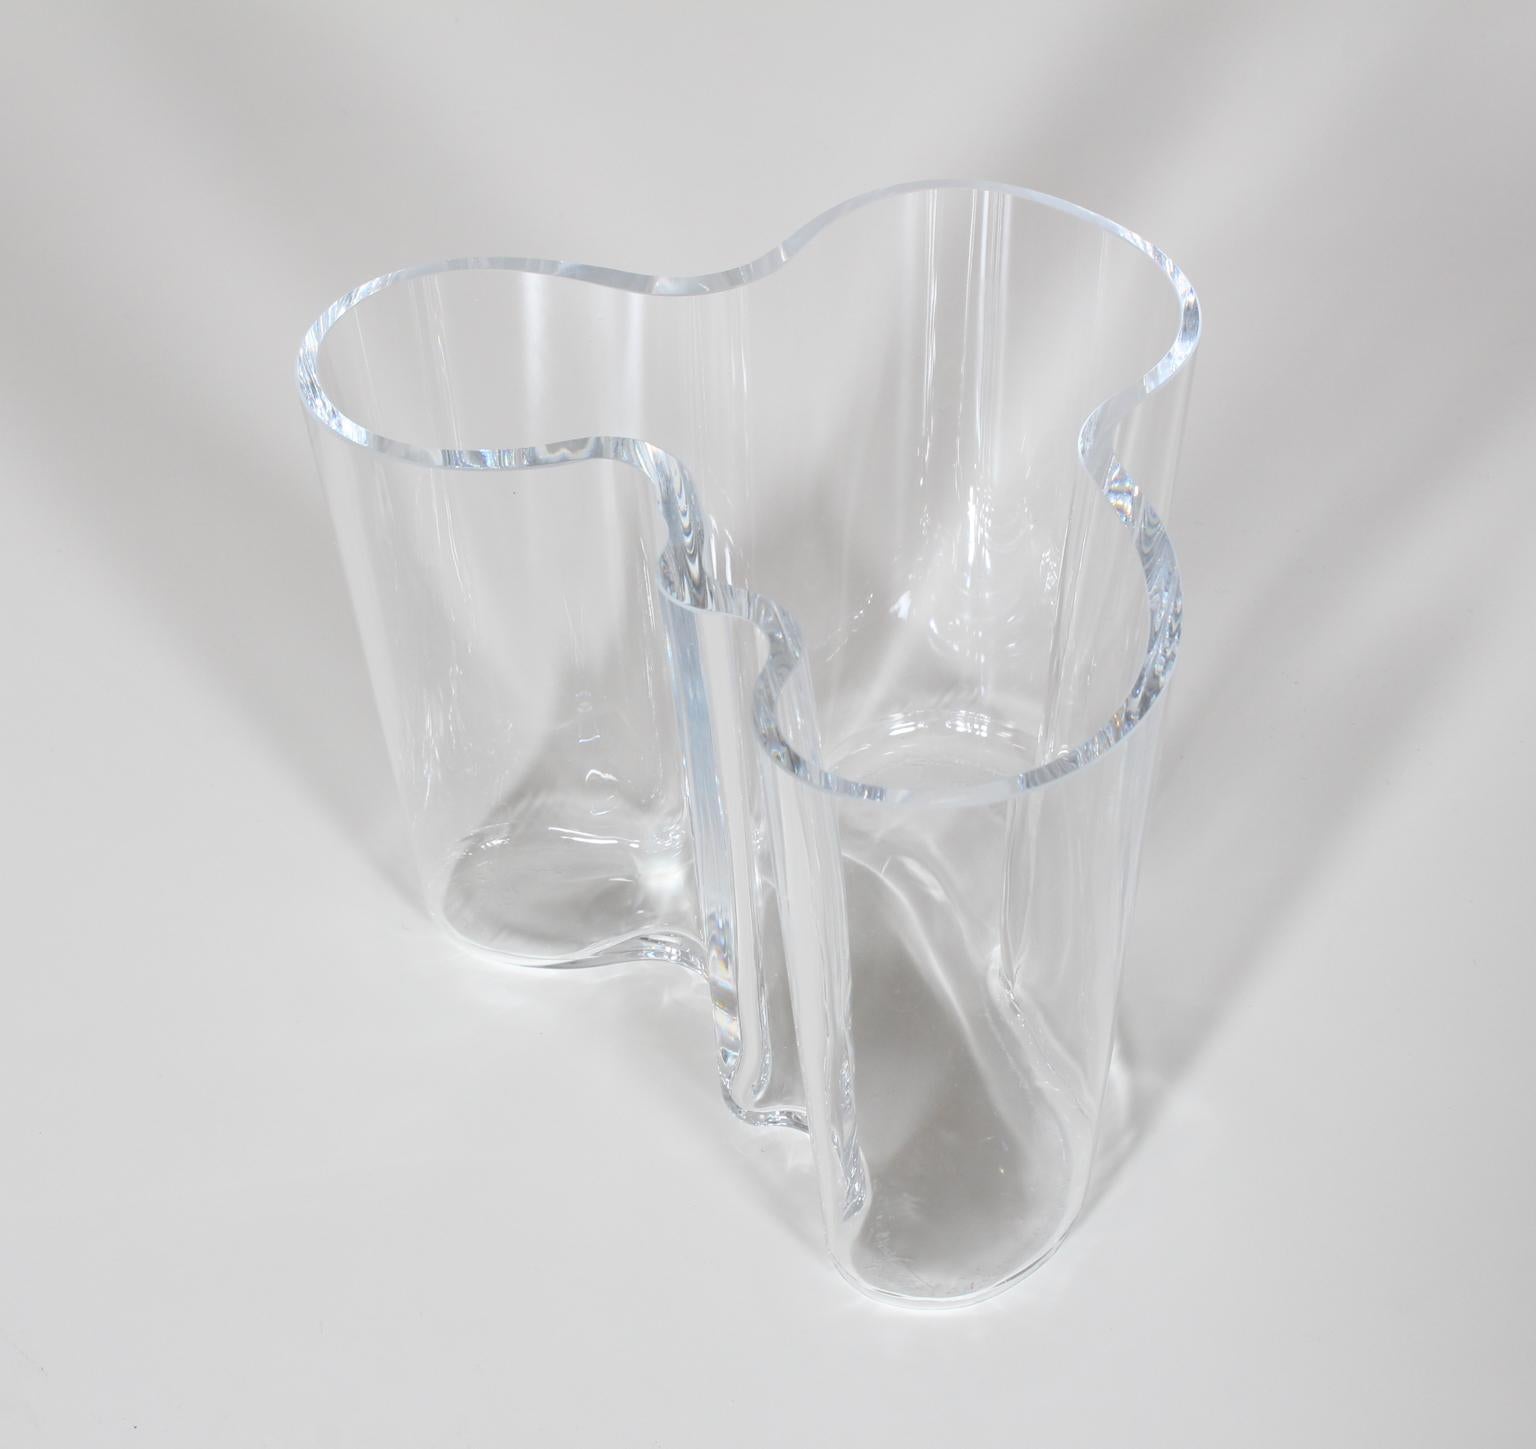 1950s, Mid-Century Modern, blown glass 'Savoy' vase designed by Alvar Aalto with acid etched mark on bottom.
  